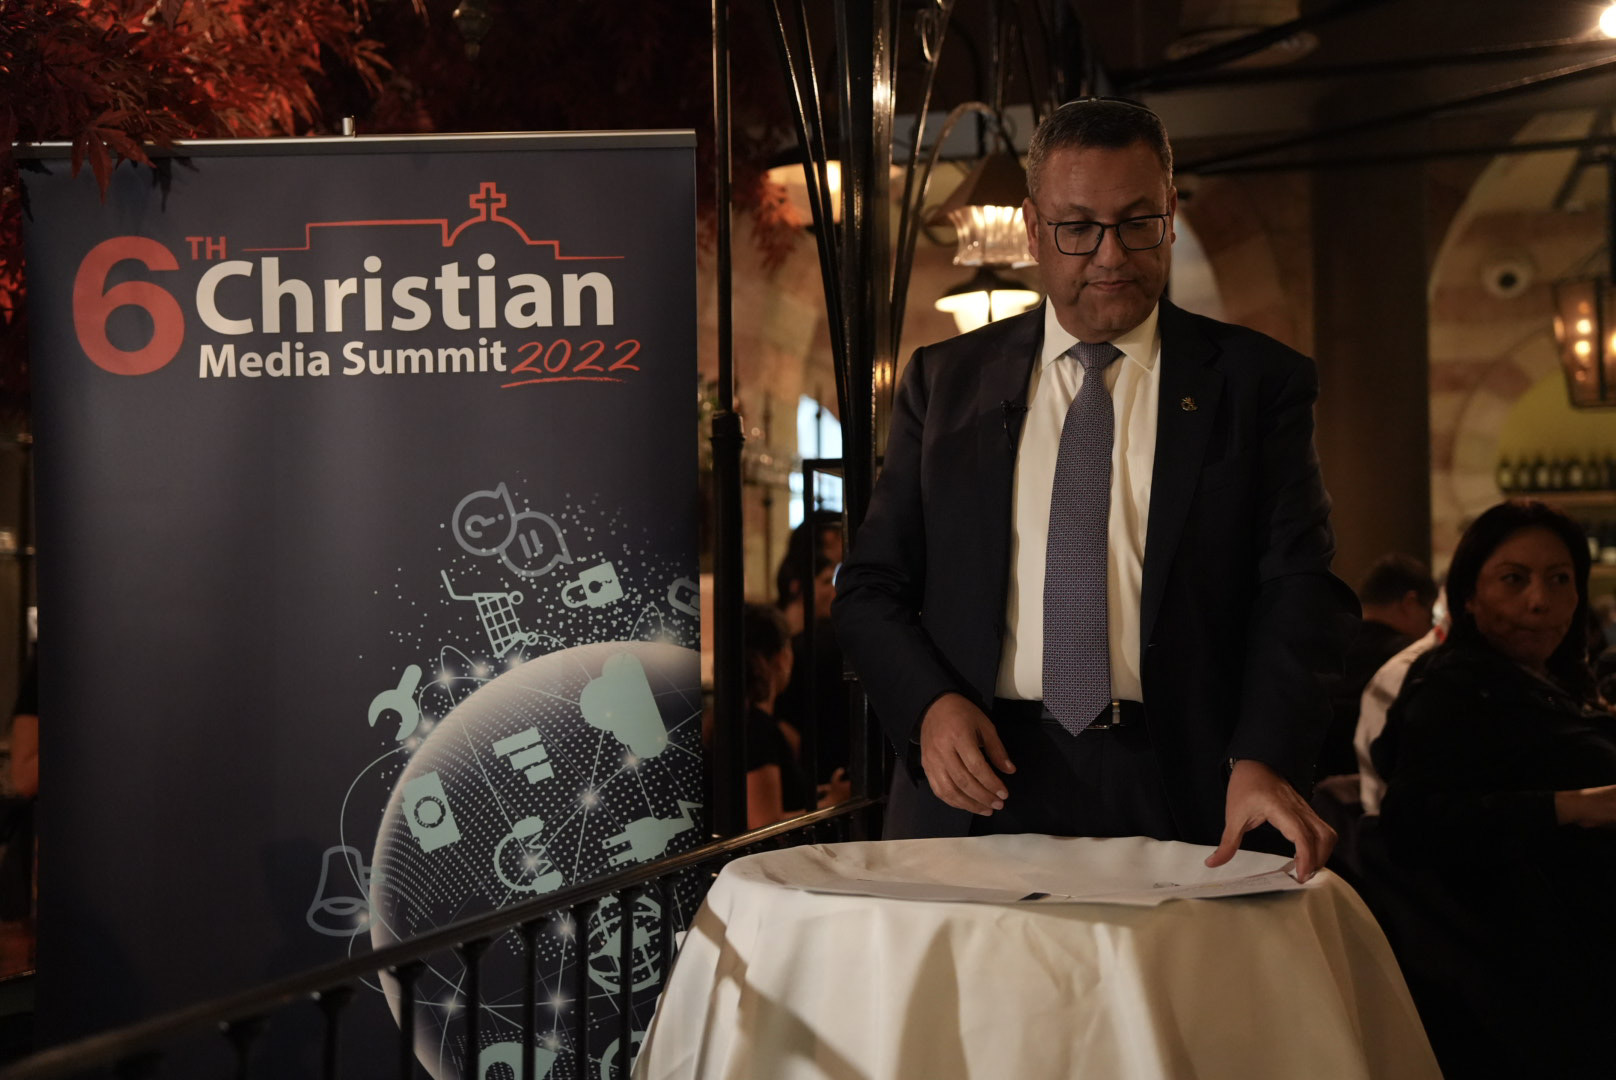 Moshe Lion, Mayor of Jerusalem, greeted the participants of the sixth Christian Media Summit in a local resturant in Jerusalem, Israel, on December 12, 2022.